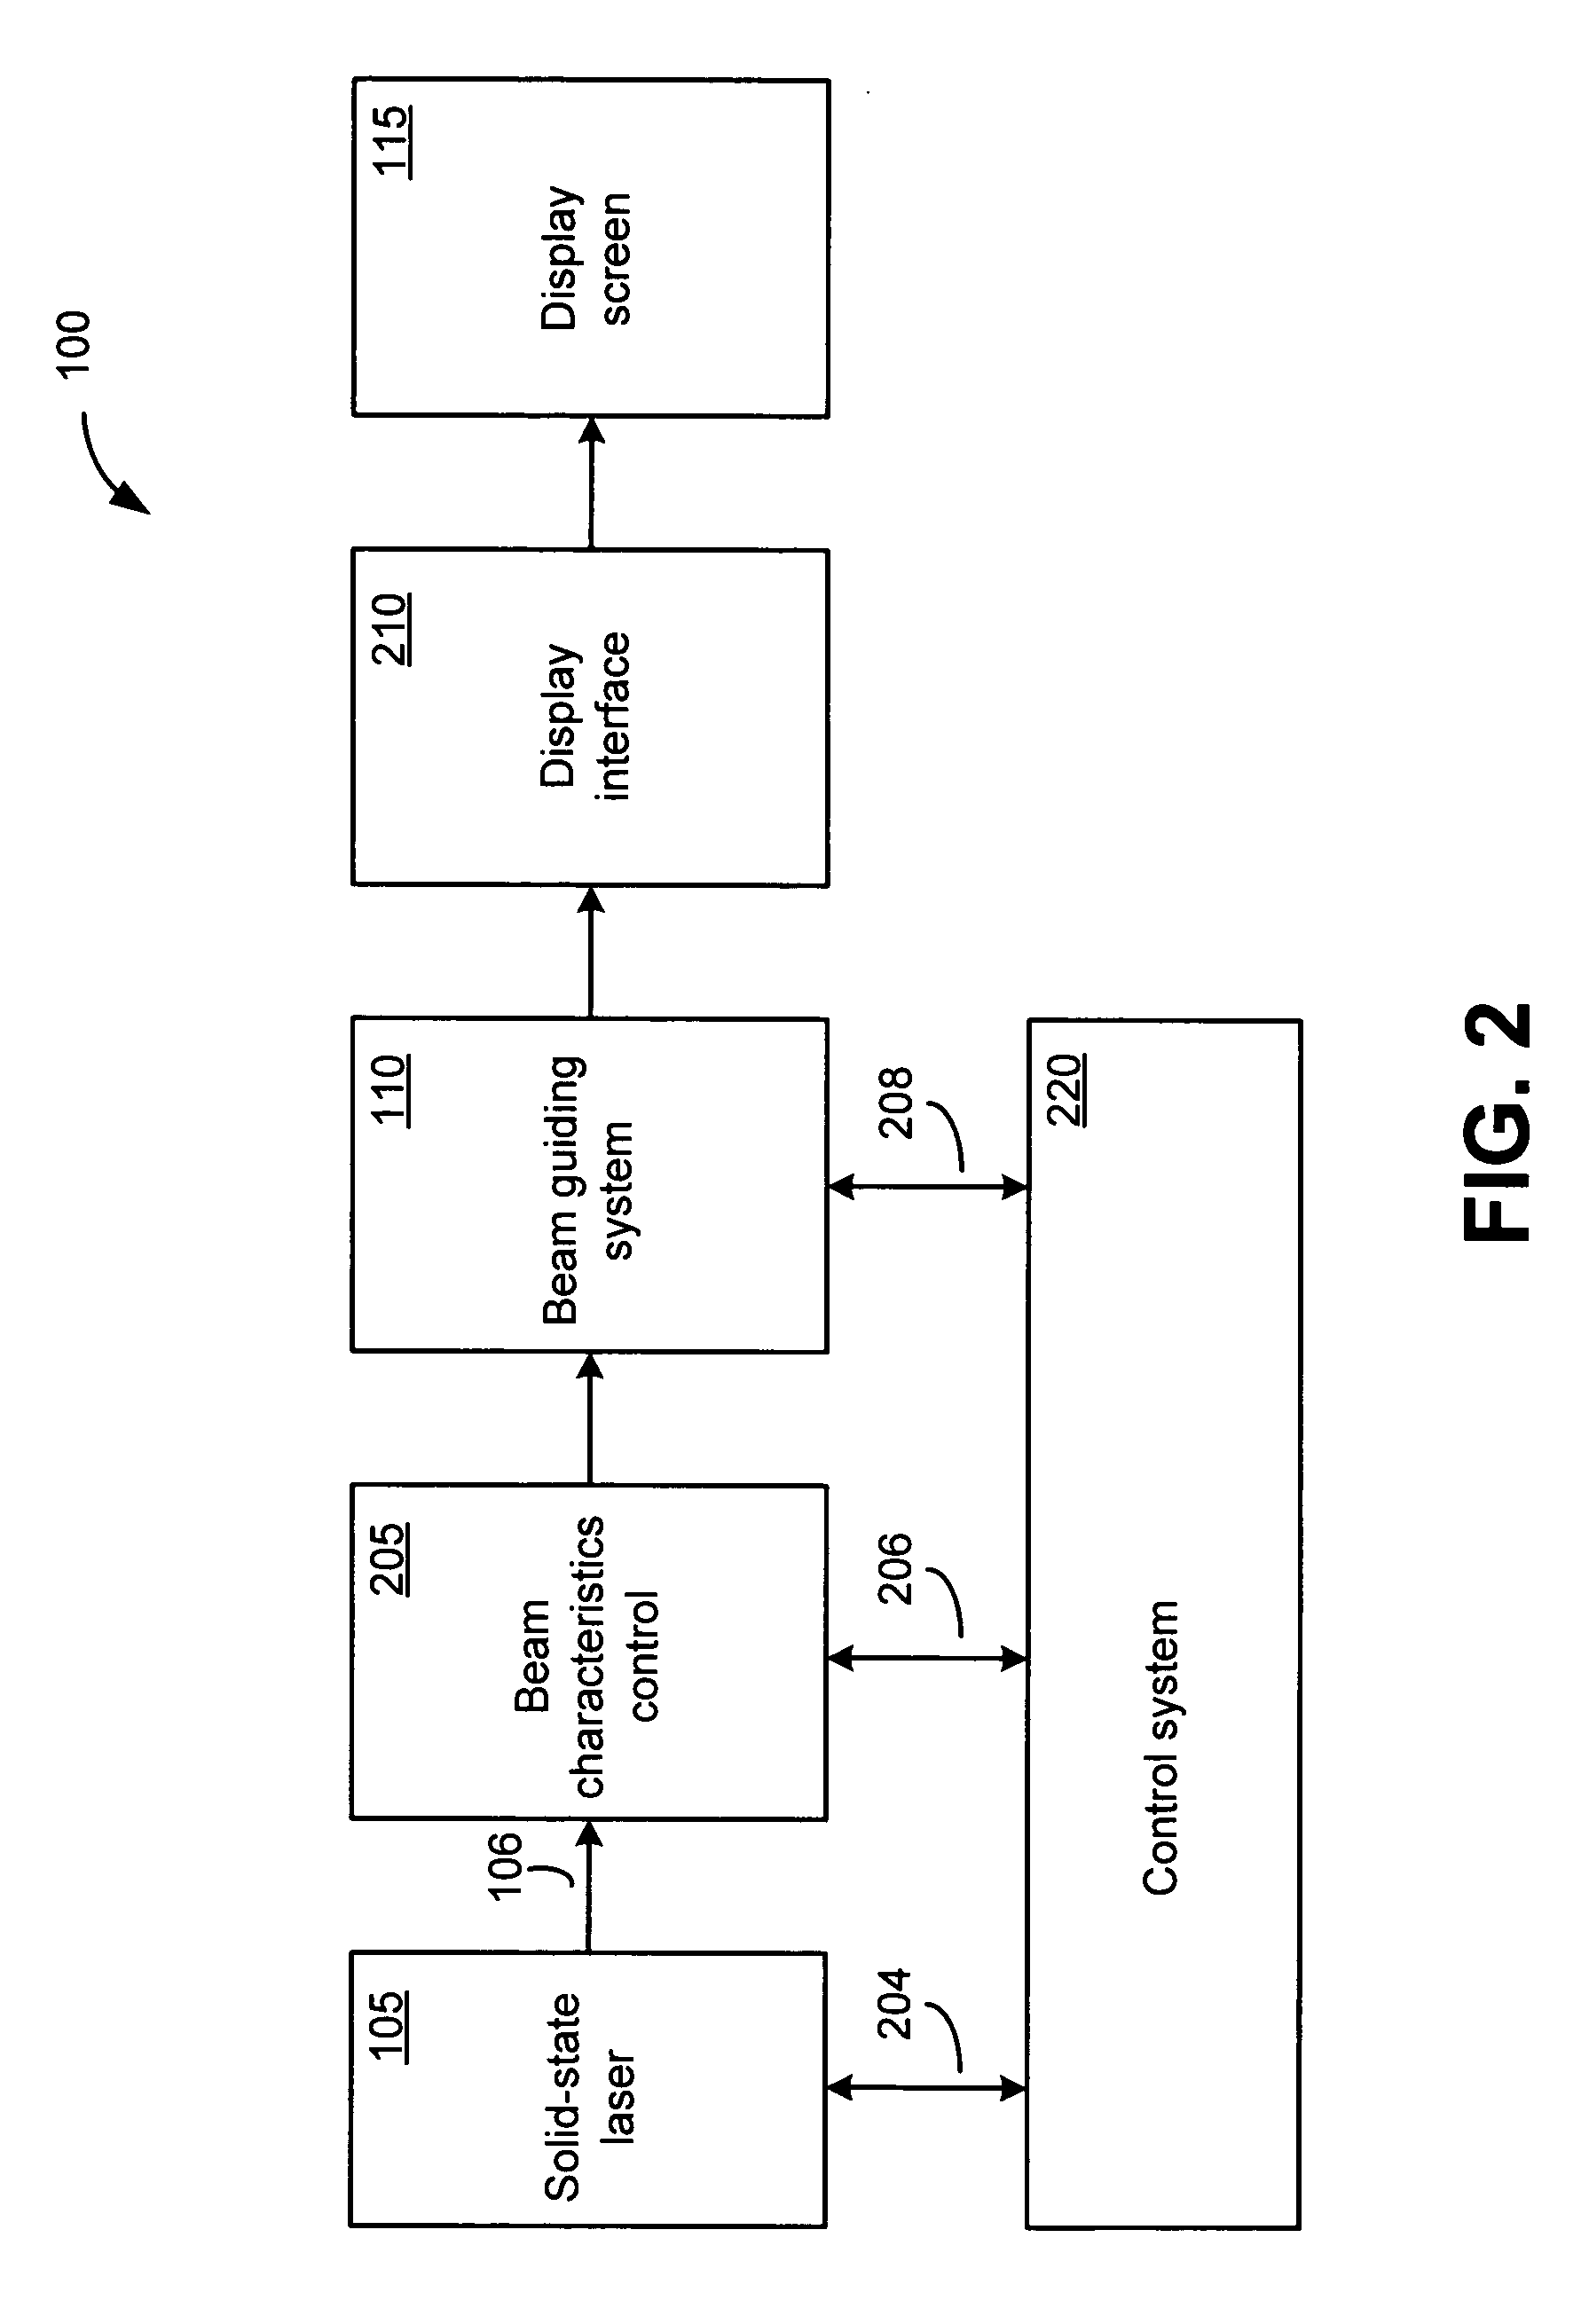 Display system and method using a solid state laser